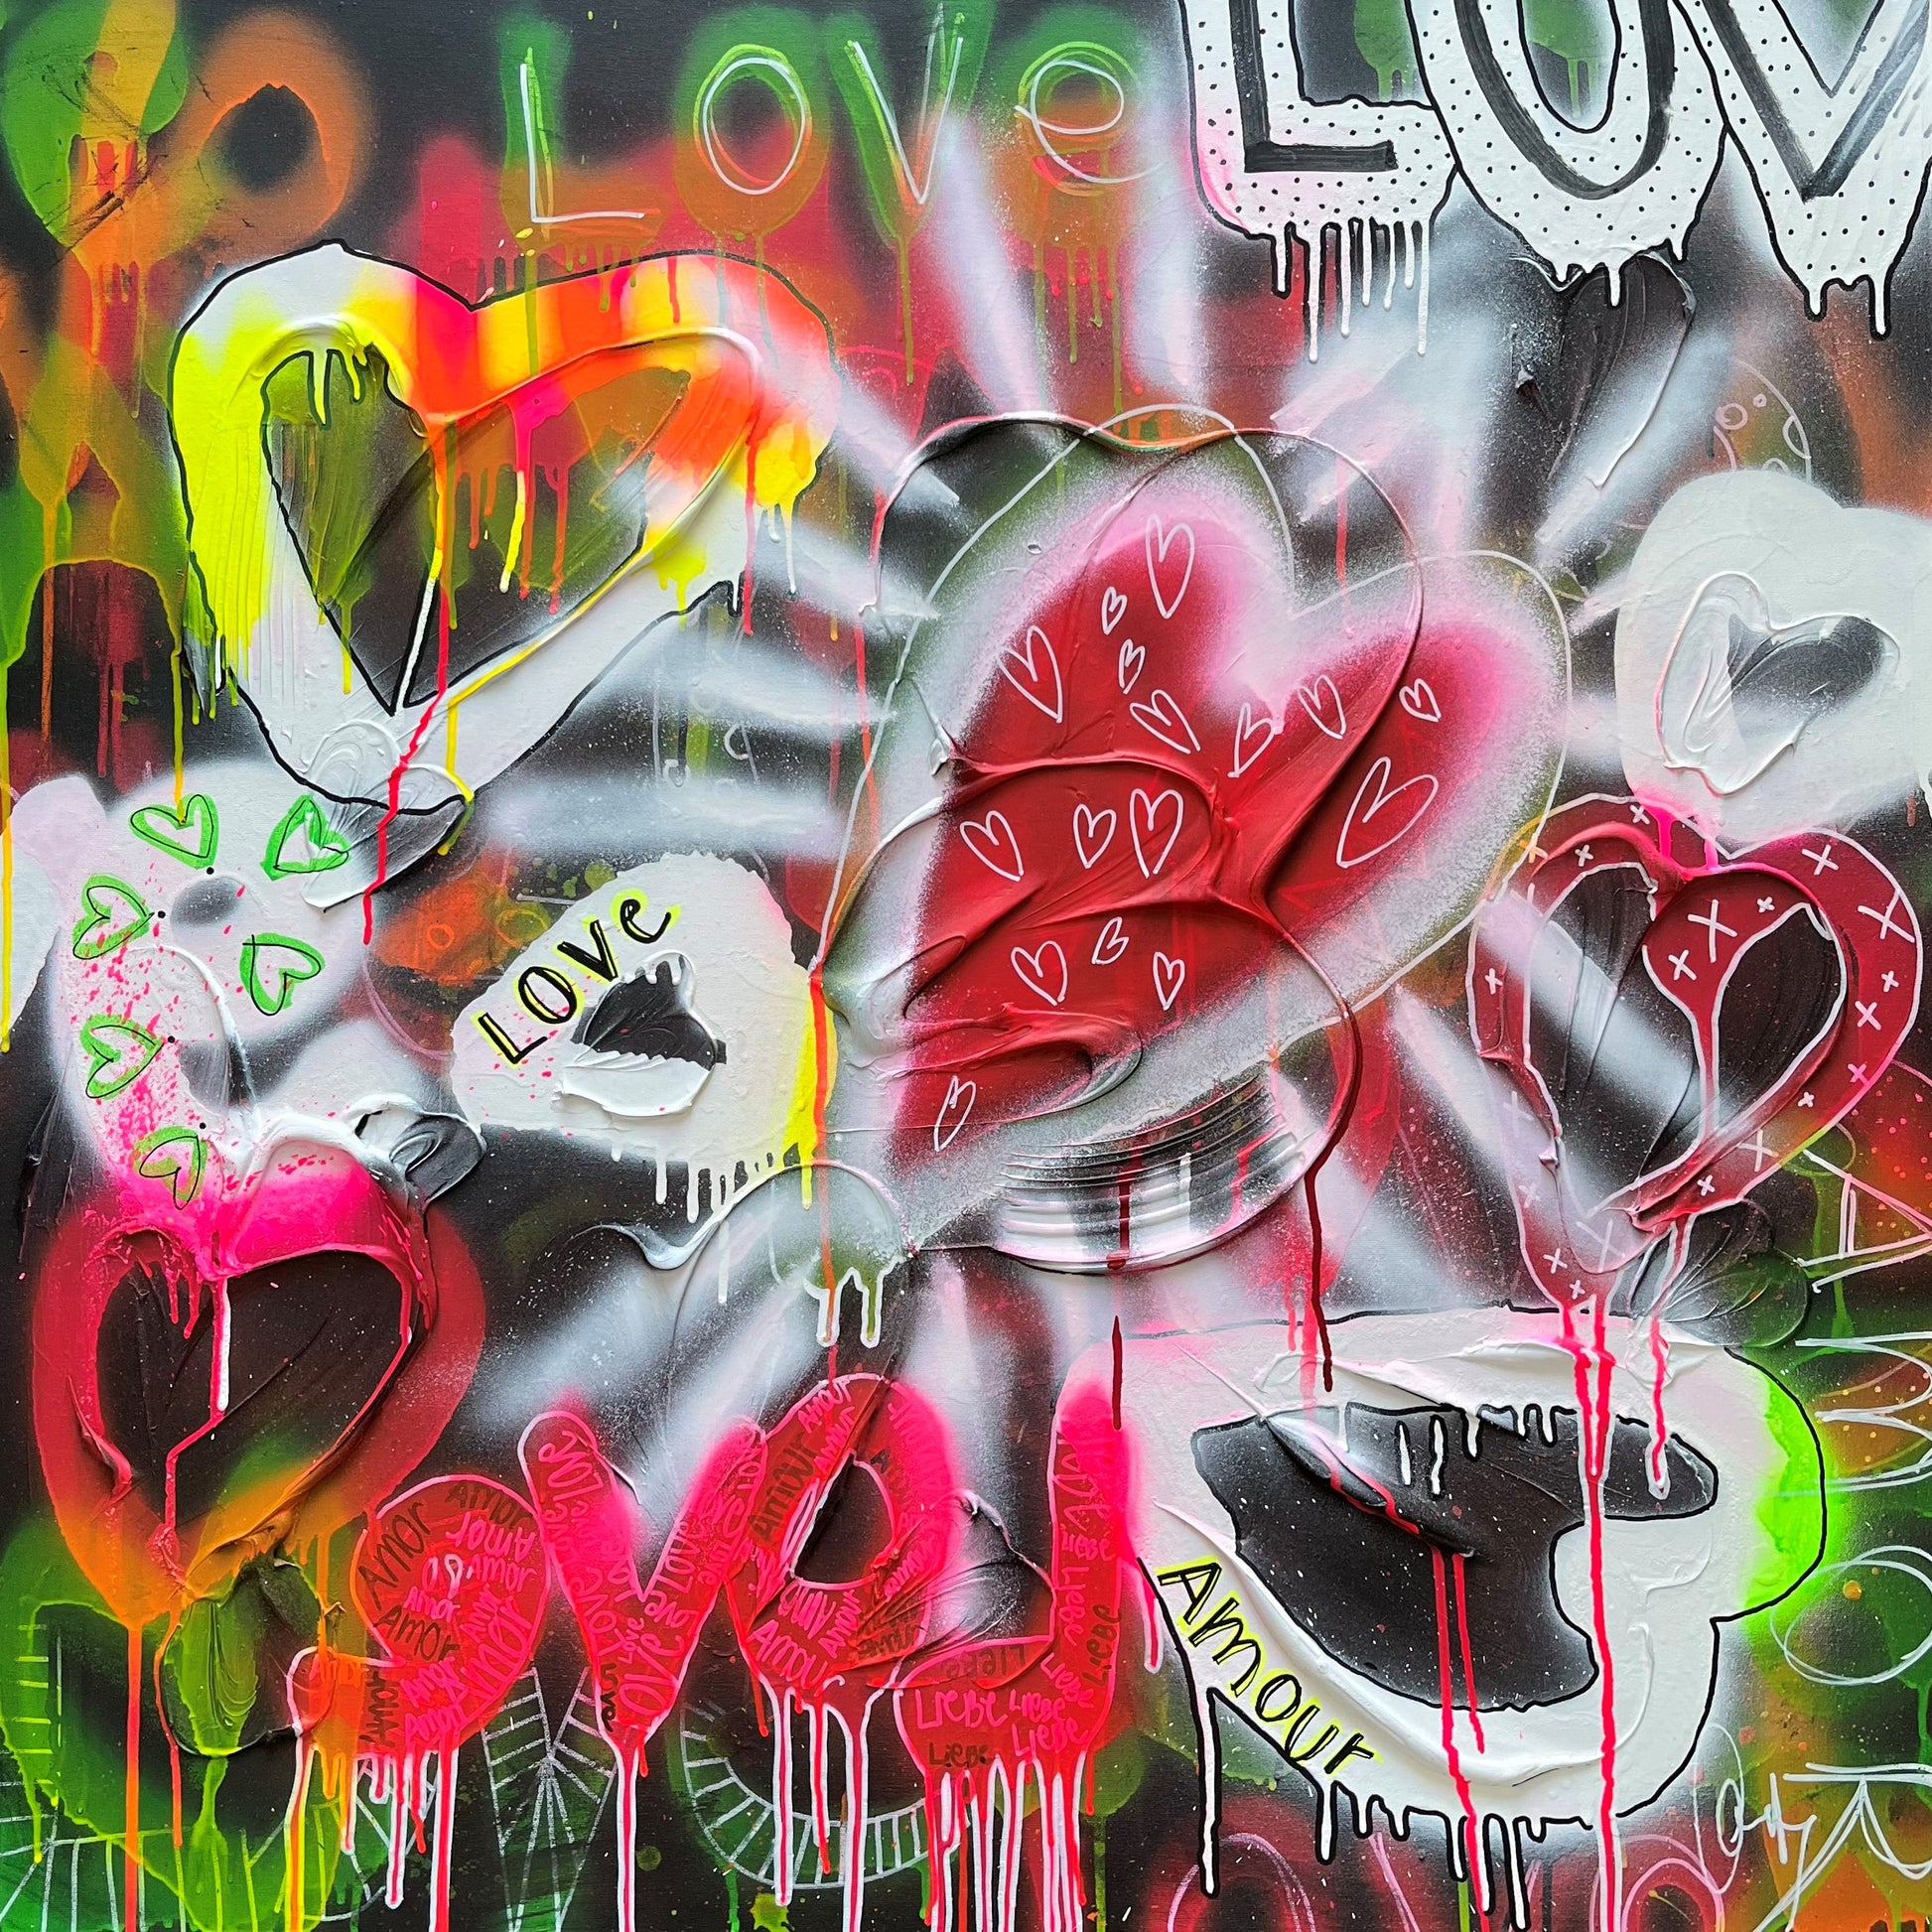 Large 36''x36'' original painting, contemporary abstract, colorful artwork about love with writings and hearts, graffiti syle art